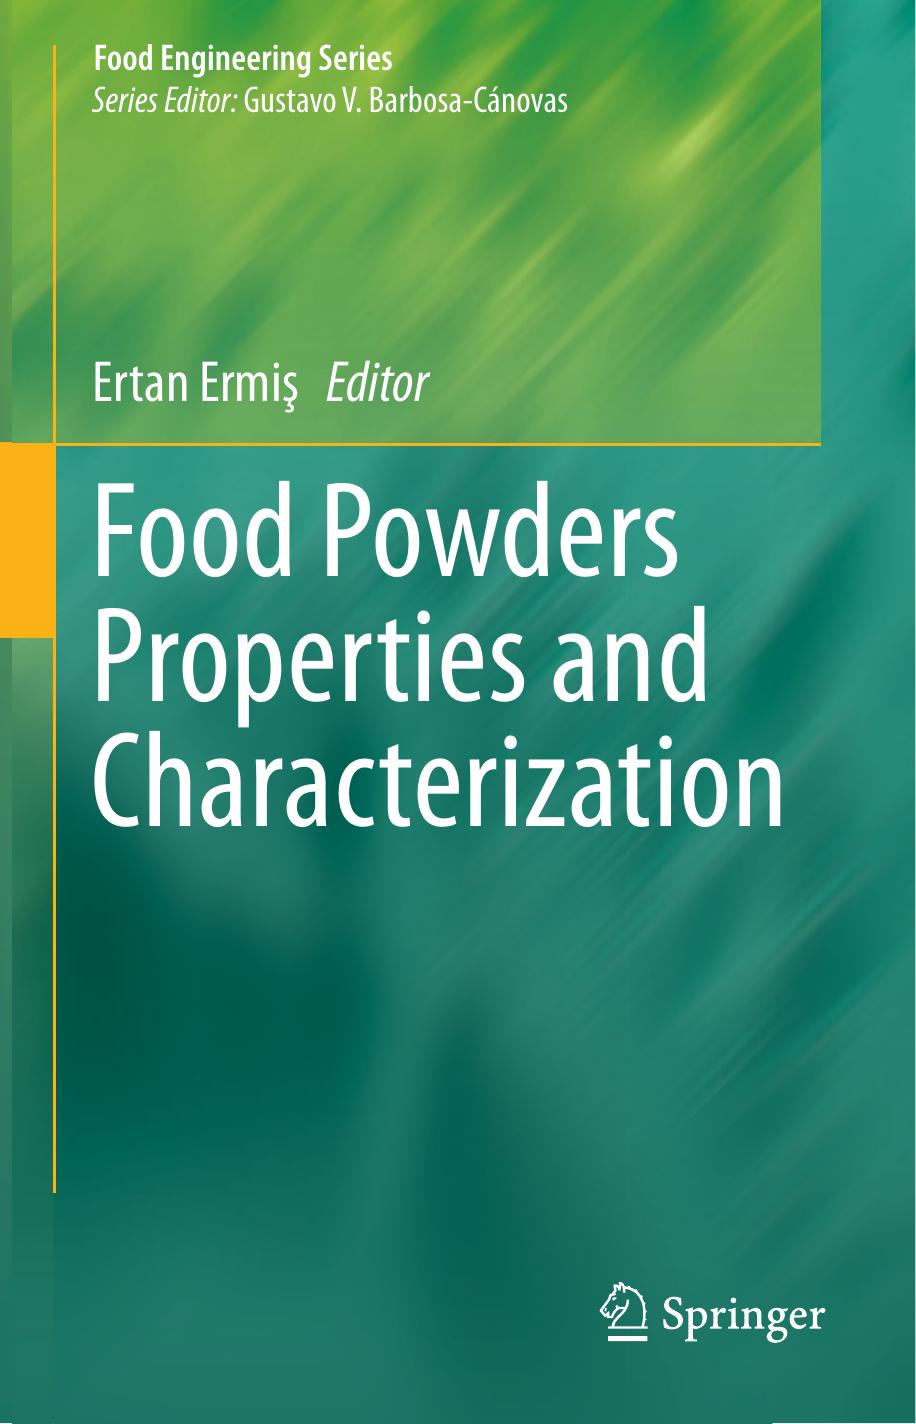 Food Powders Properties and Characterization-Springer (2020)